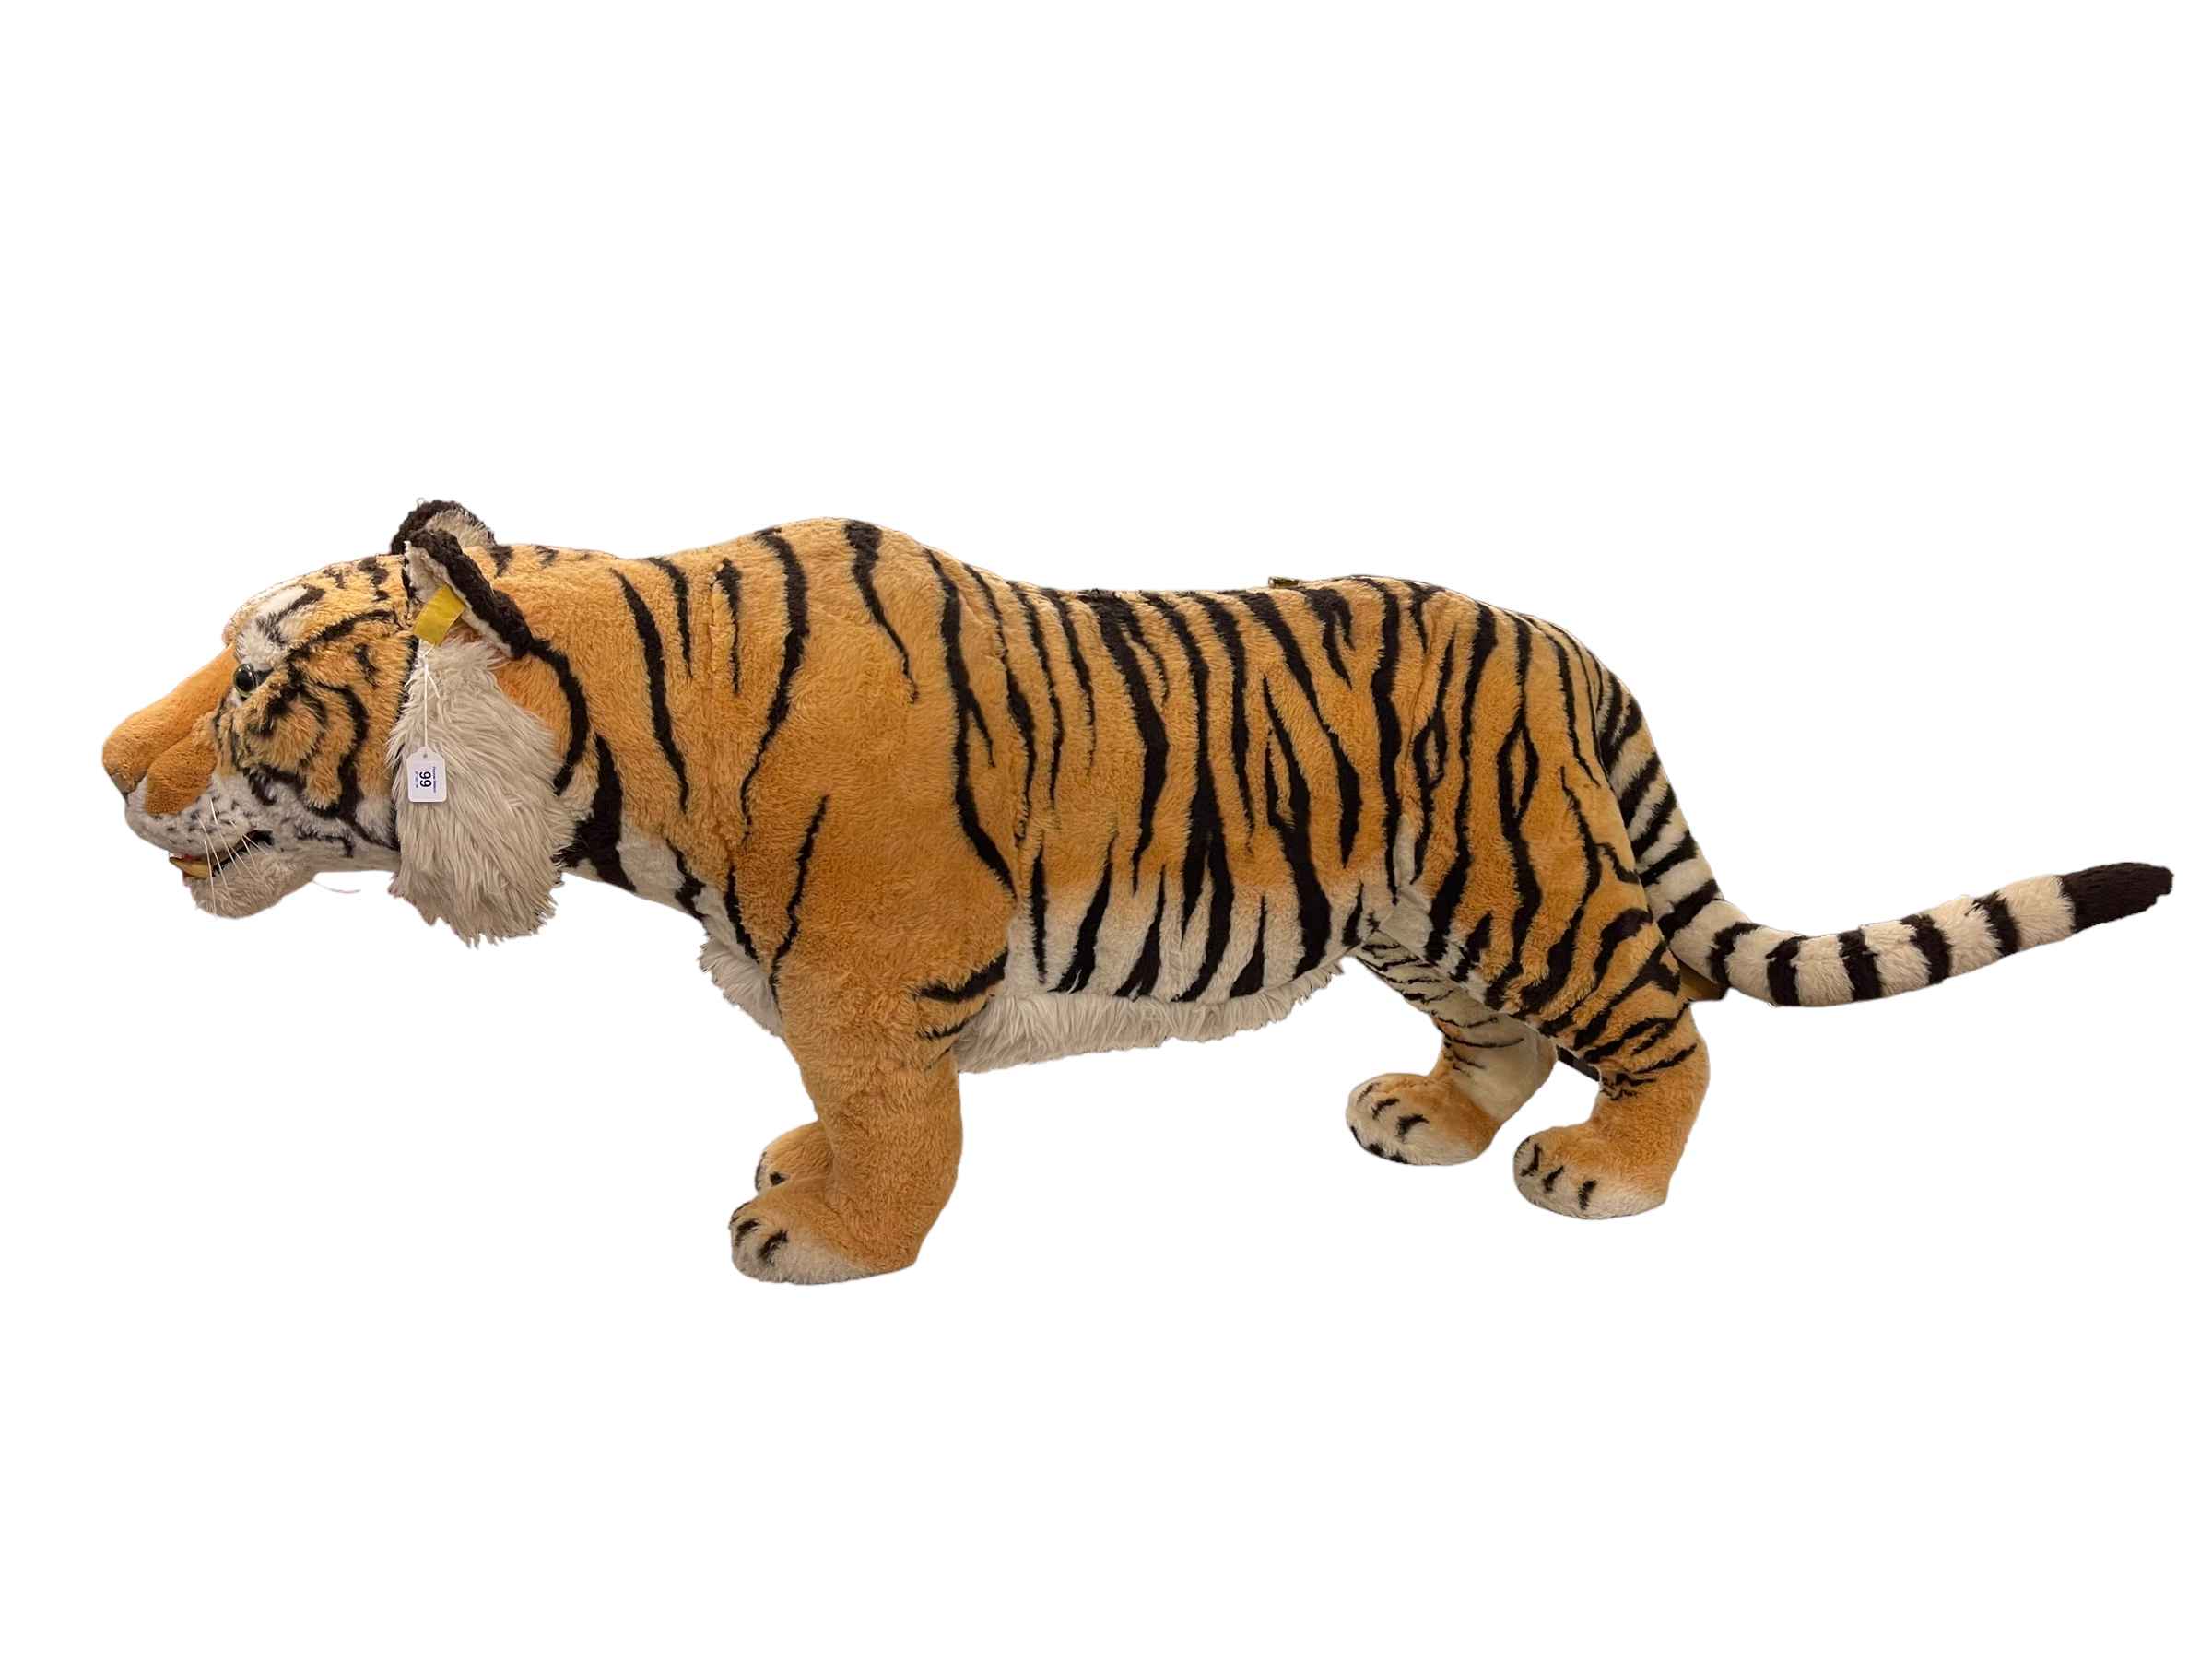 Steiff Bengal Tiger, approximately 215cm by 75cm by 34cm.